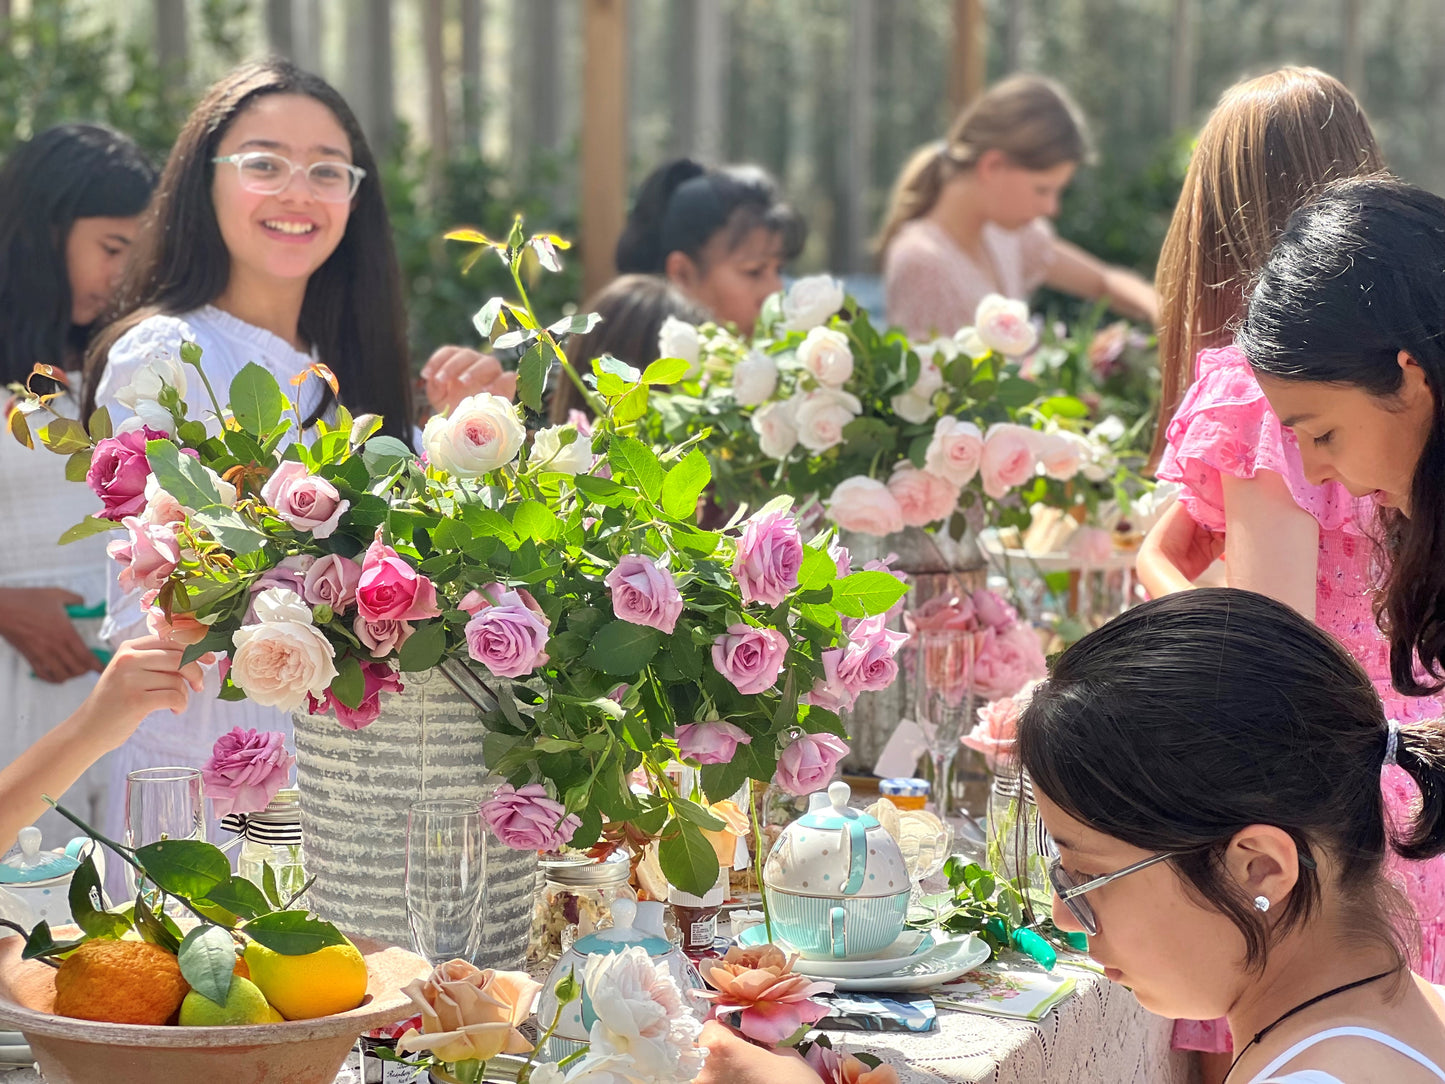 Afternoon Tea & Flower Bar - CHILD TICKET (Ages 3-12 years old)